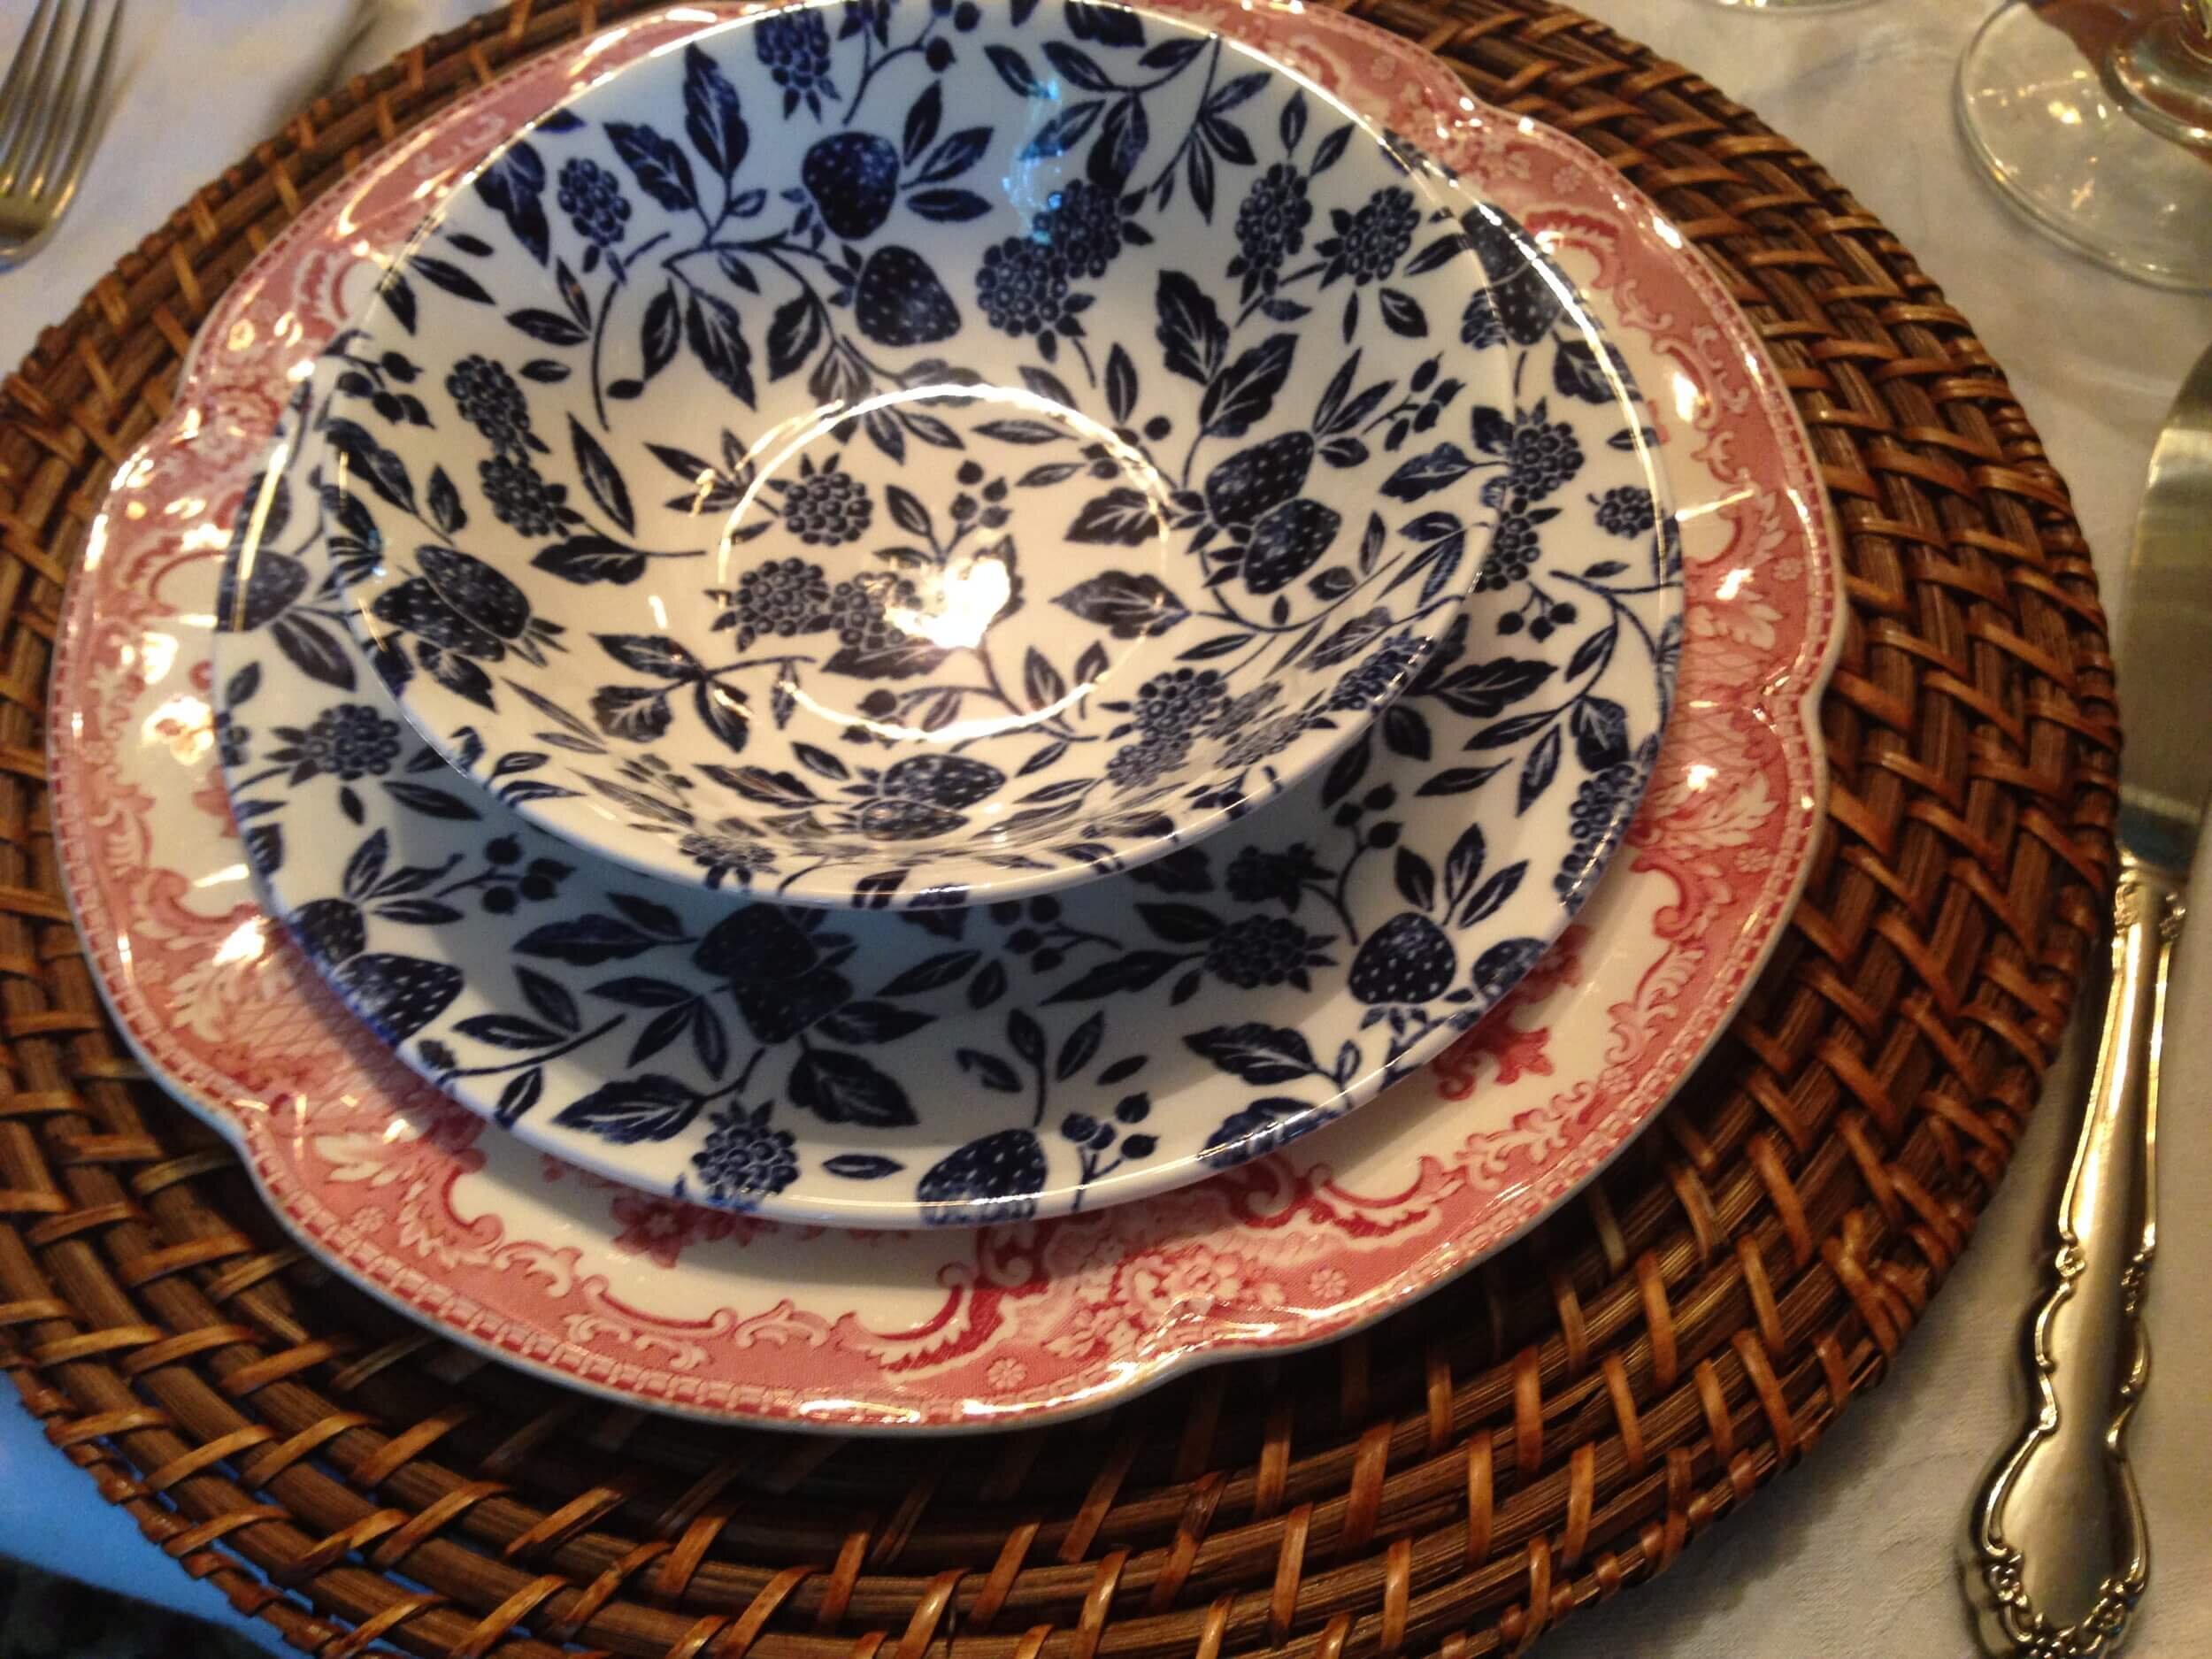 Transferware+and+chintzware+combine+for+a+casual+mix-and-match+patriotic+place+setting.jpg